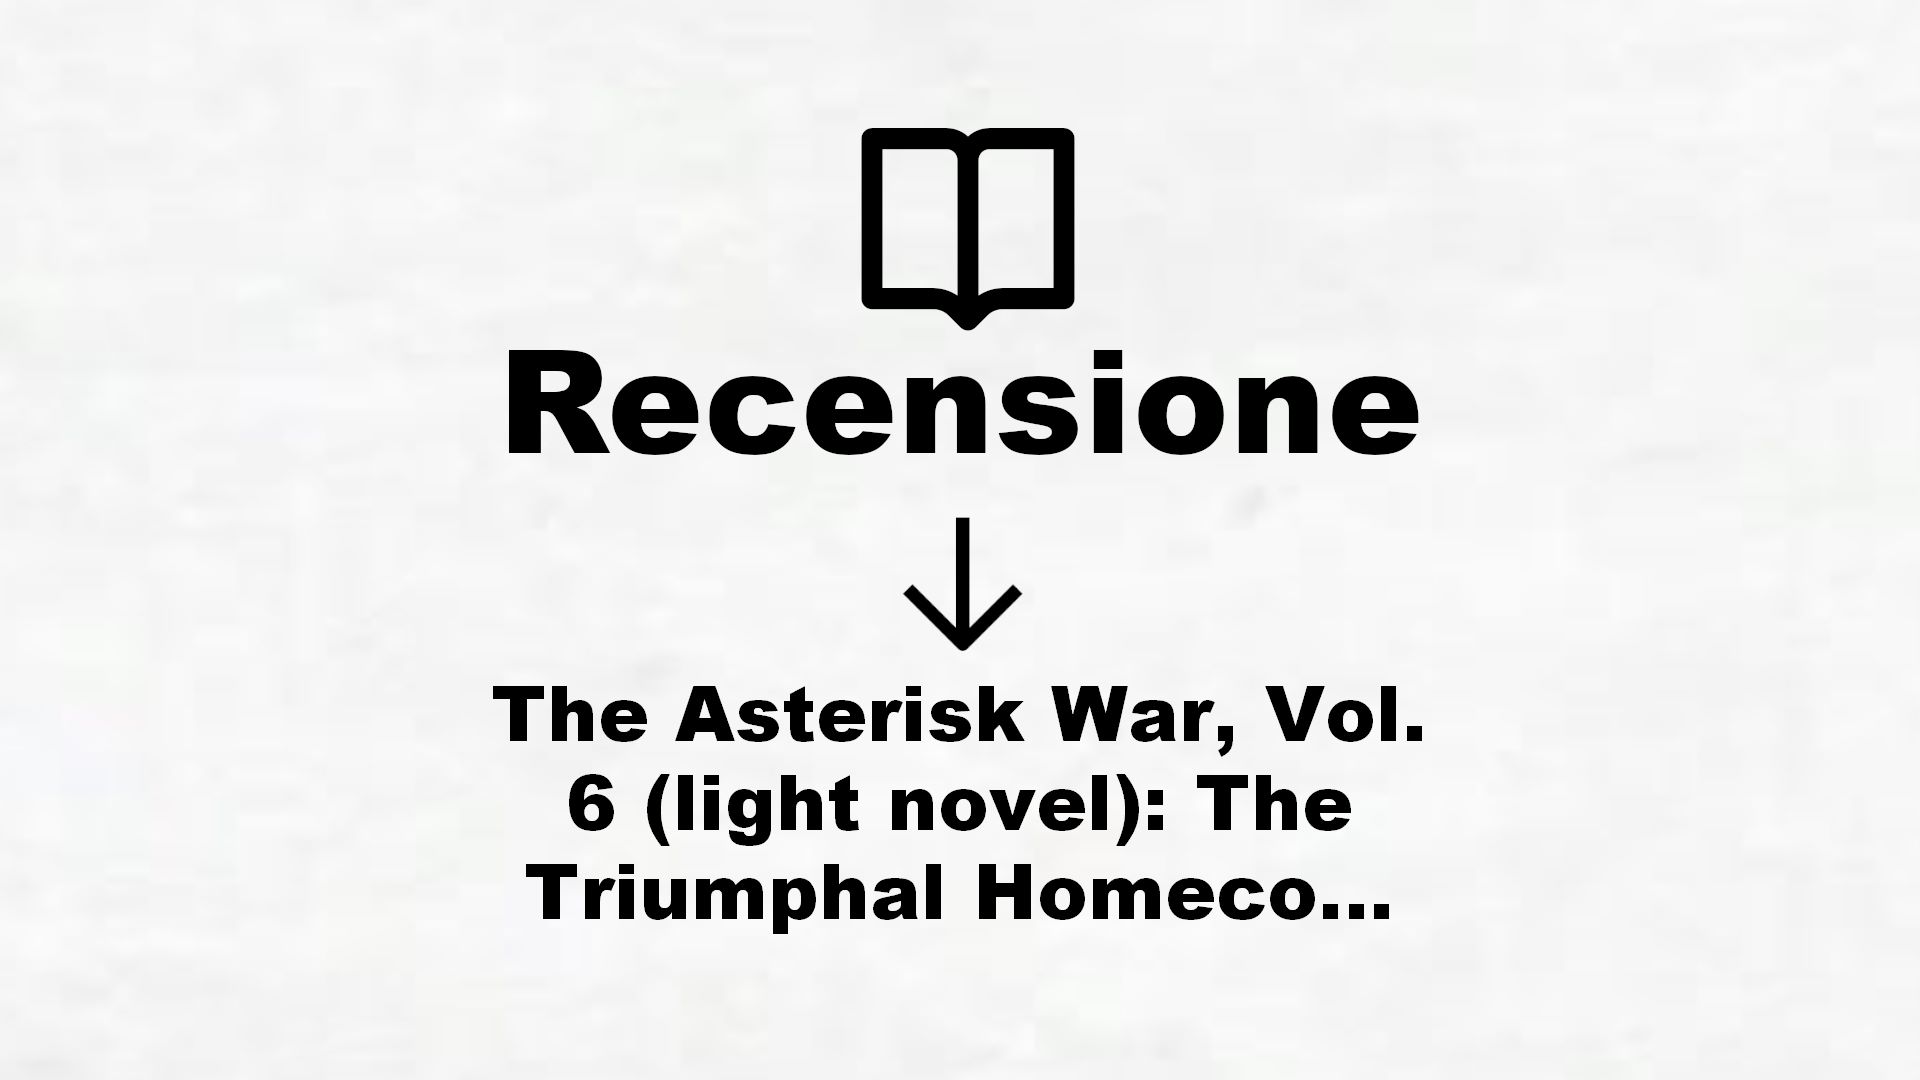 The Asterisk War, Vol. 6 (light novel): The Triumphal Homecoming Battle (English Edition) – Recensione Libro